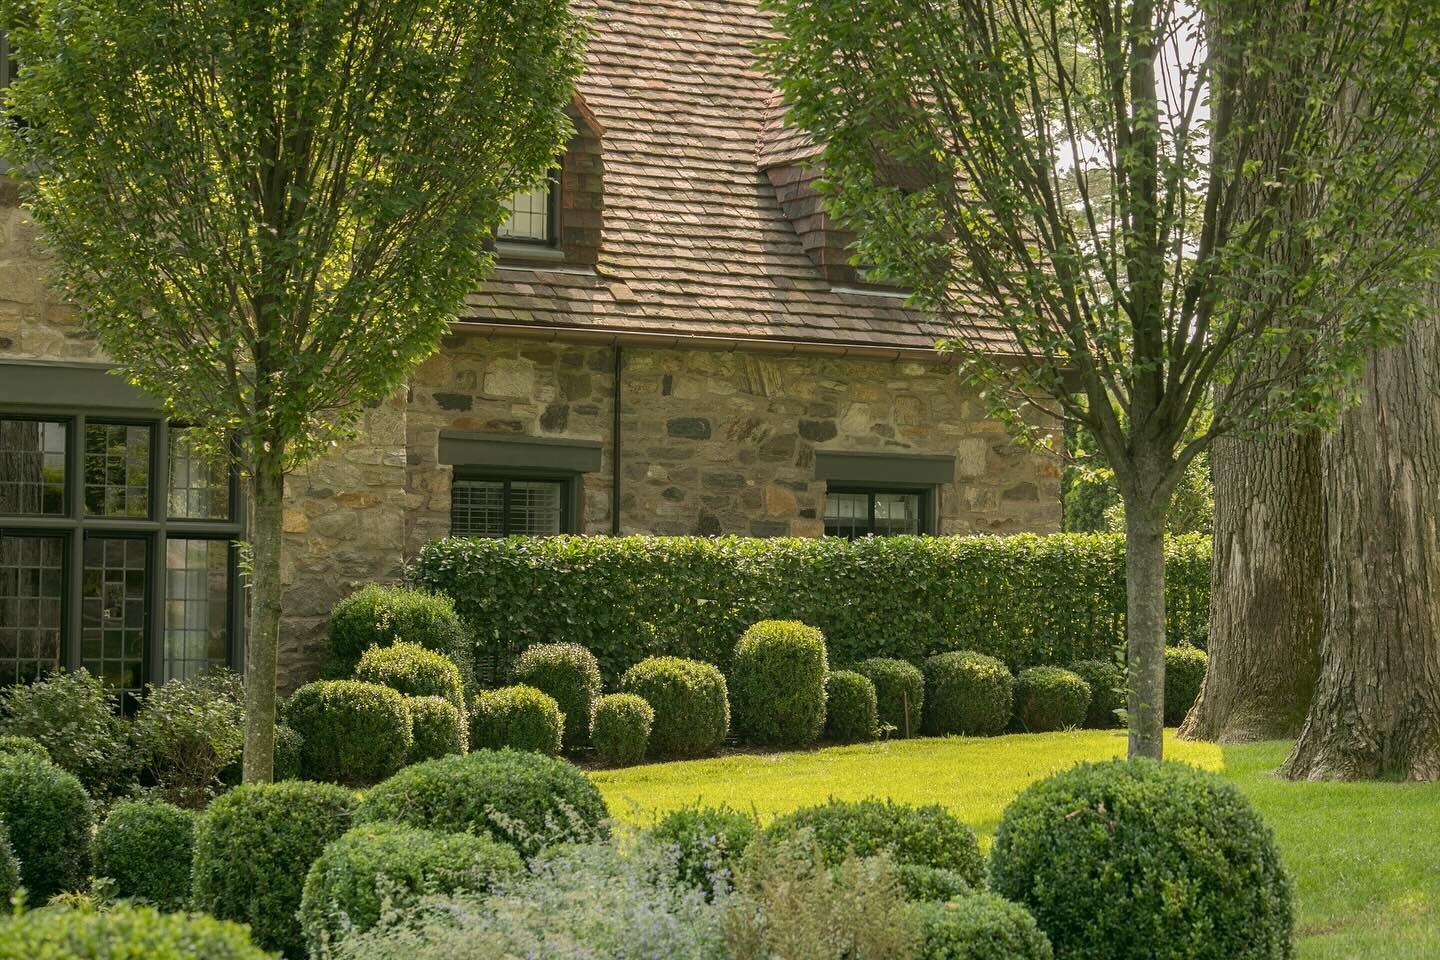 Dreaming of plantings and days outside in the sun more now than ever after such a cold and rainy early spring. We are so close.  At this house entry, we put evergreen sculpted boxwoods, hornbeam trees, and a sense of seasonal changes with pockets of 